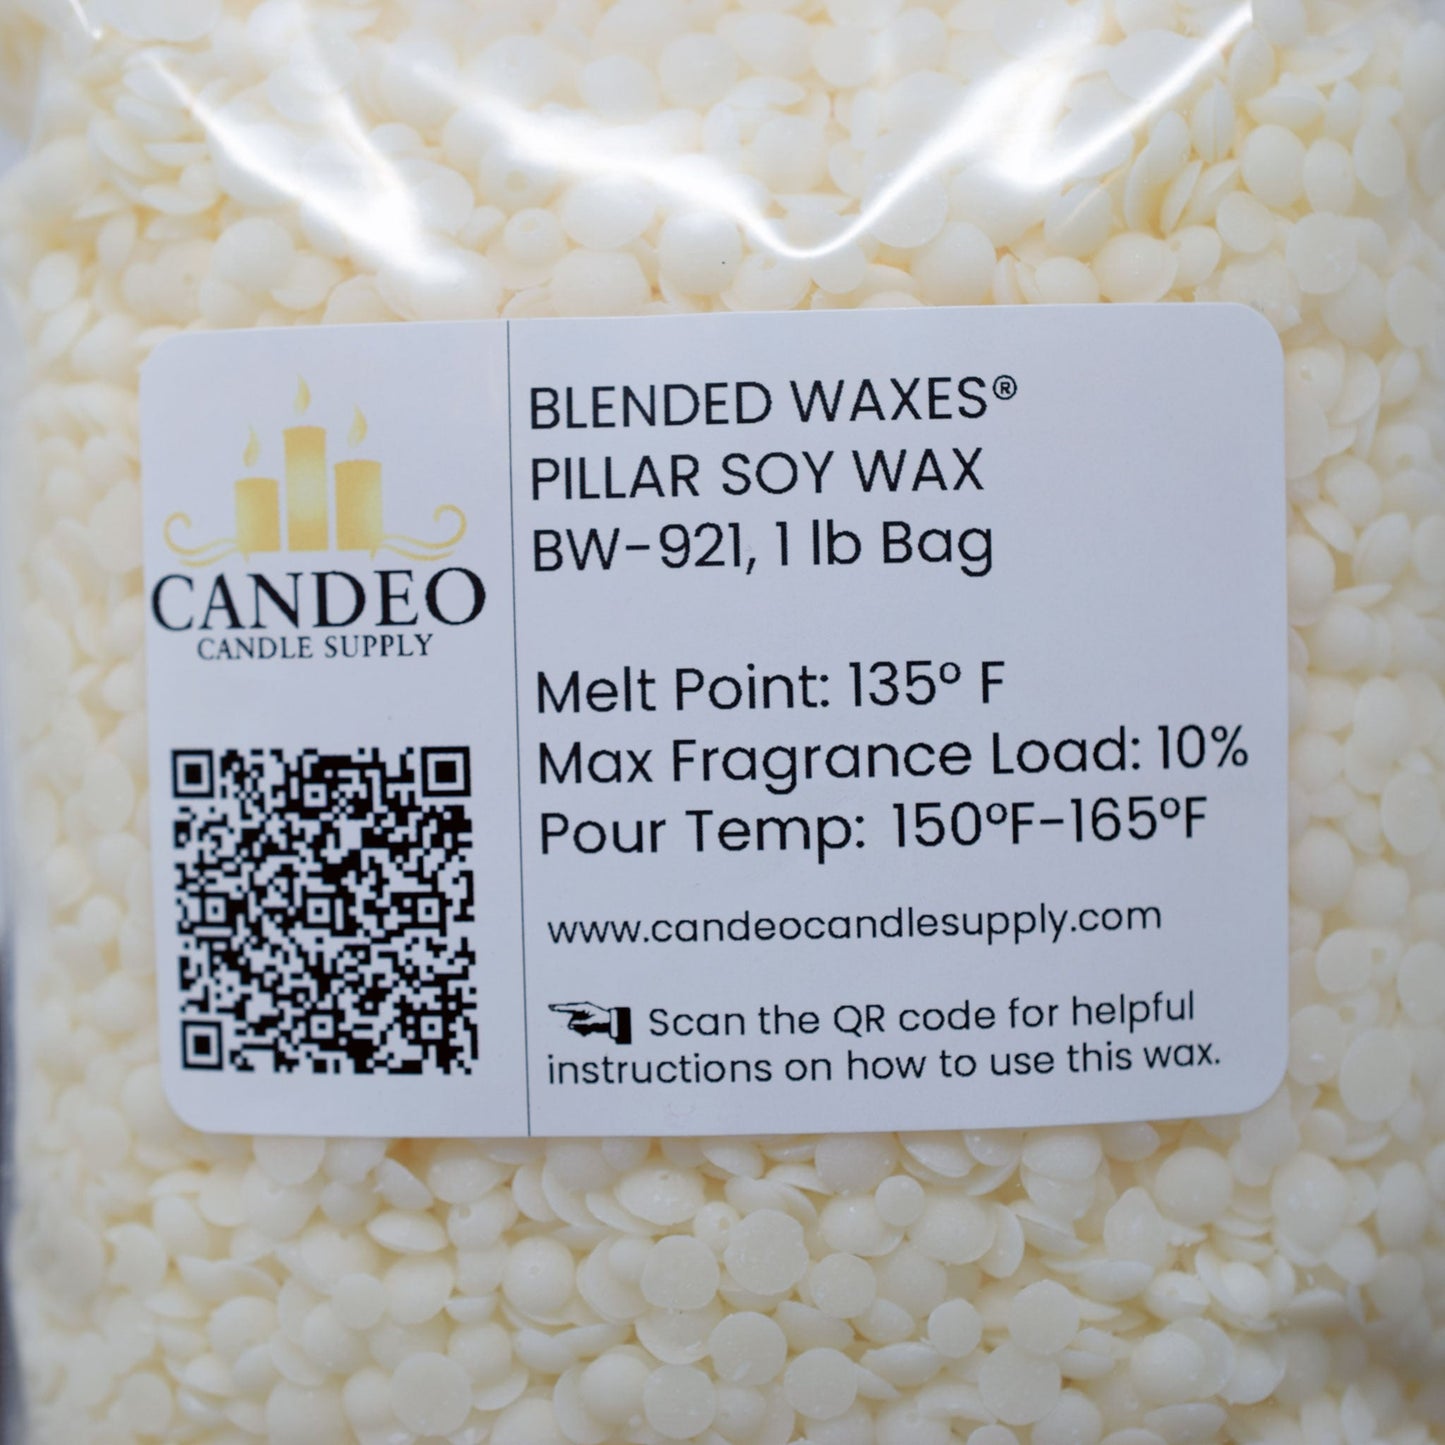 Blended Waxes® Pillar Soy Wax (BW-921) - Candeo Candle Supply